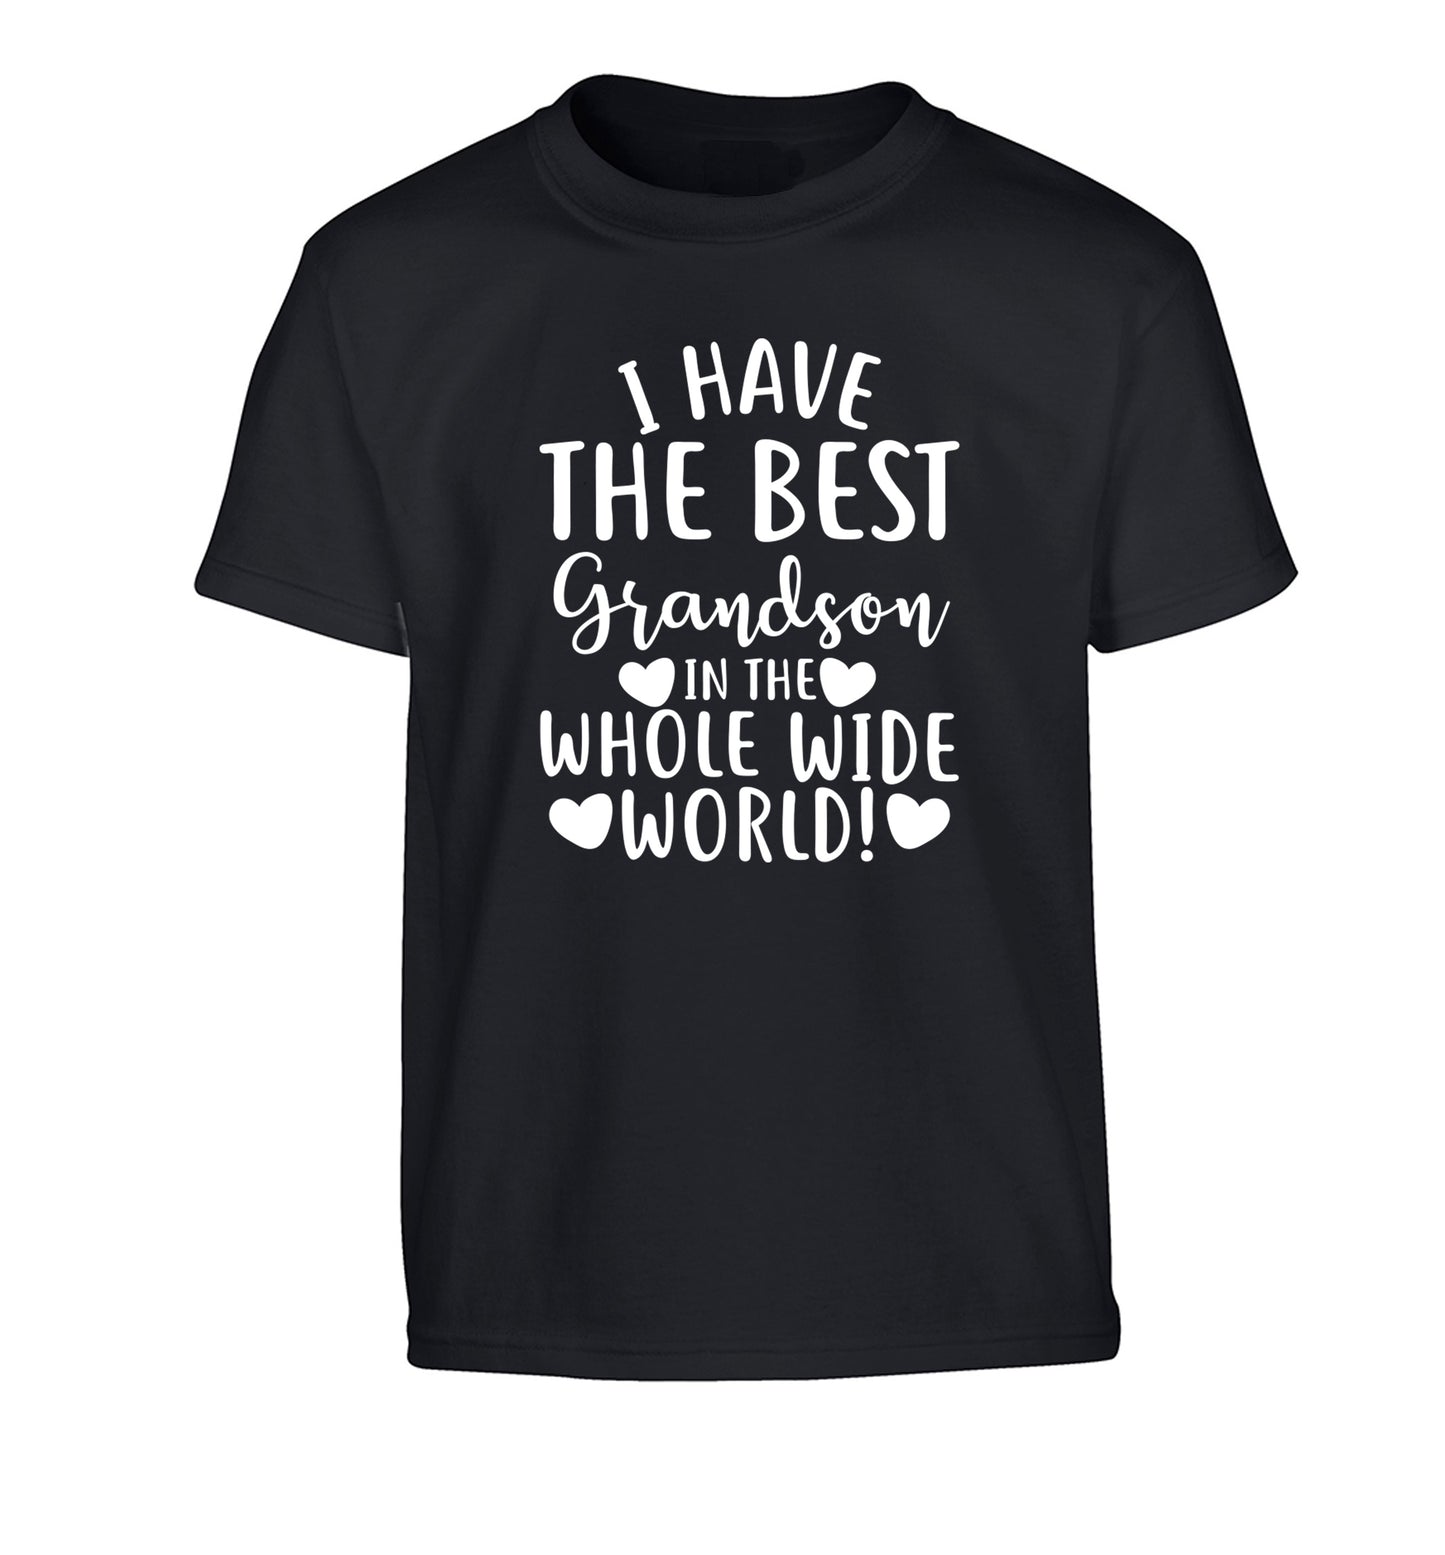 I have the best grandson in the whole wide world! Children's black Tshirt 12-13 Years